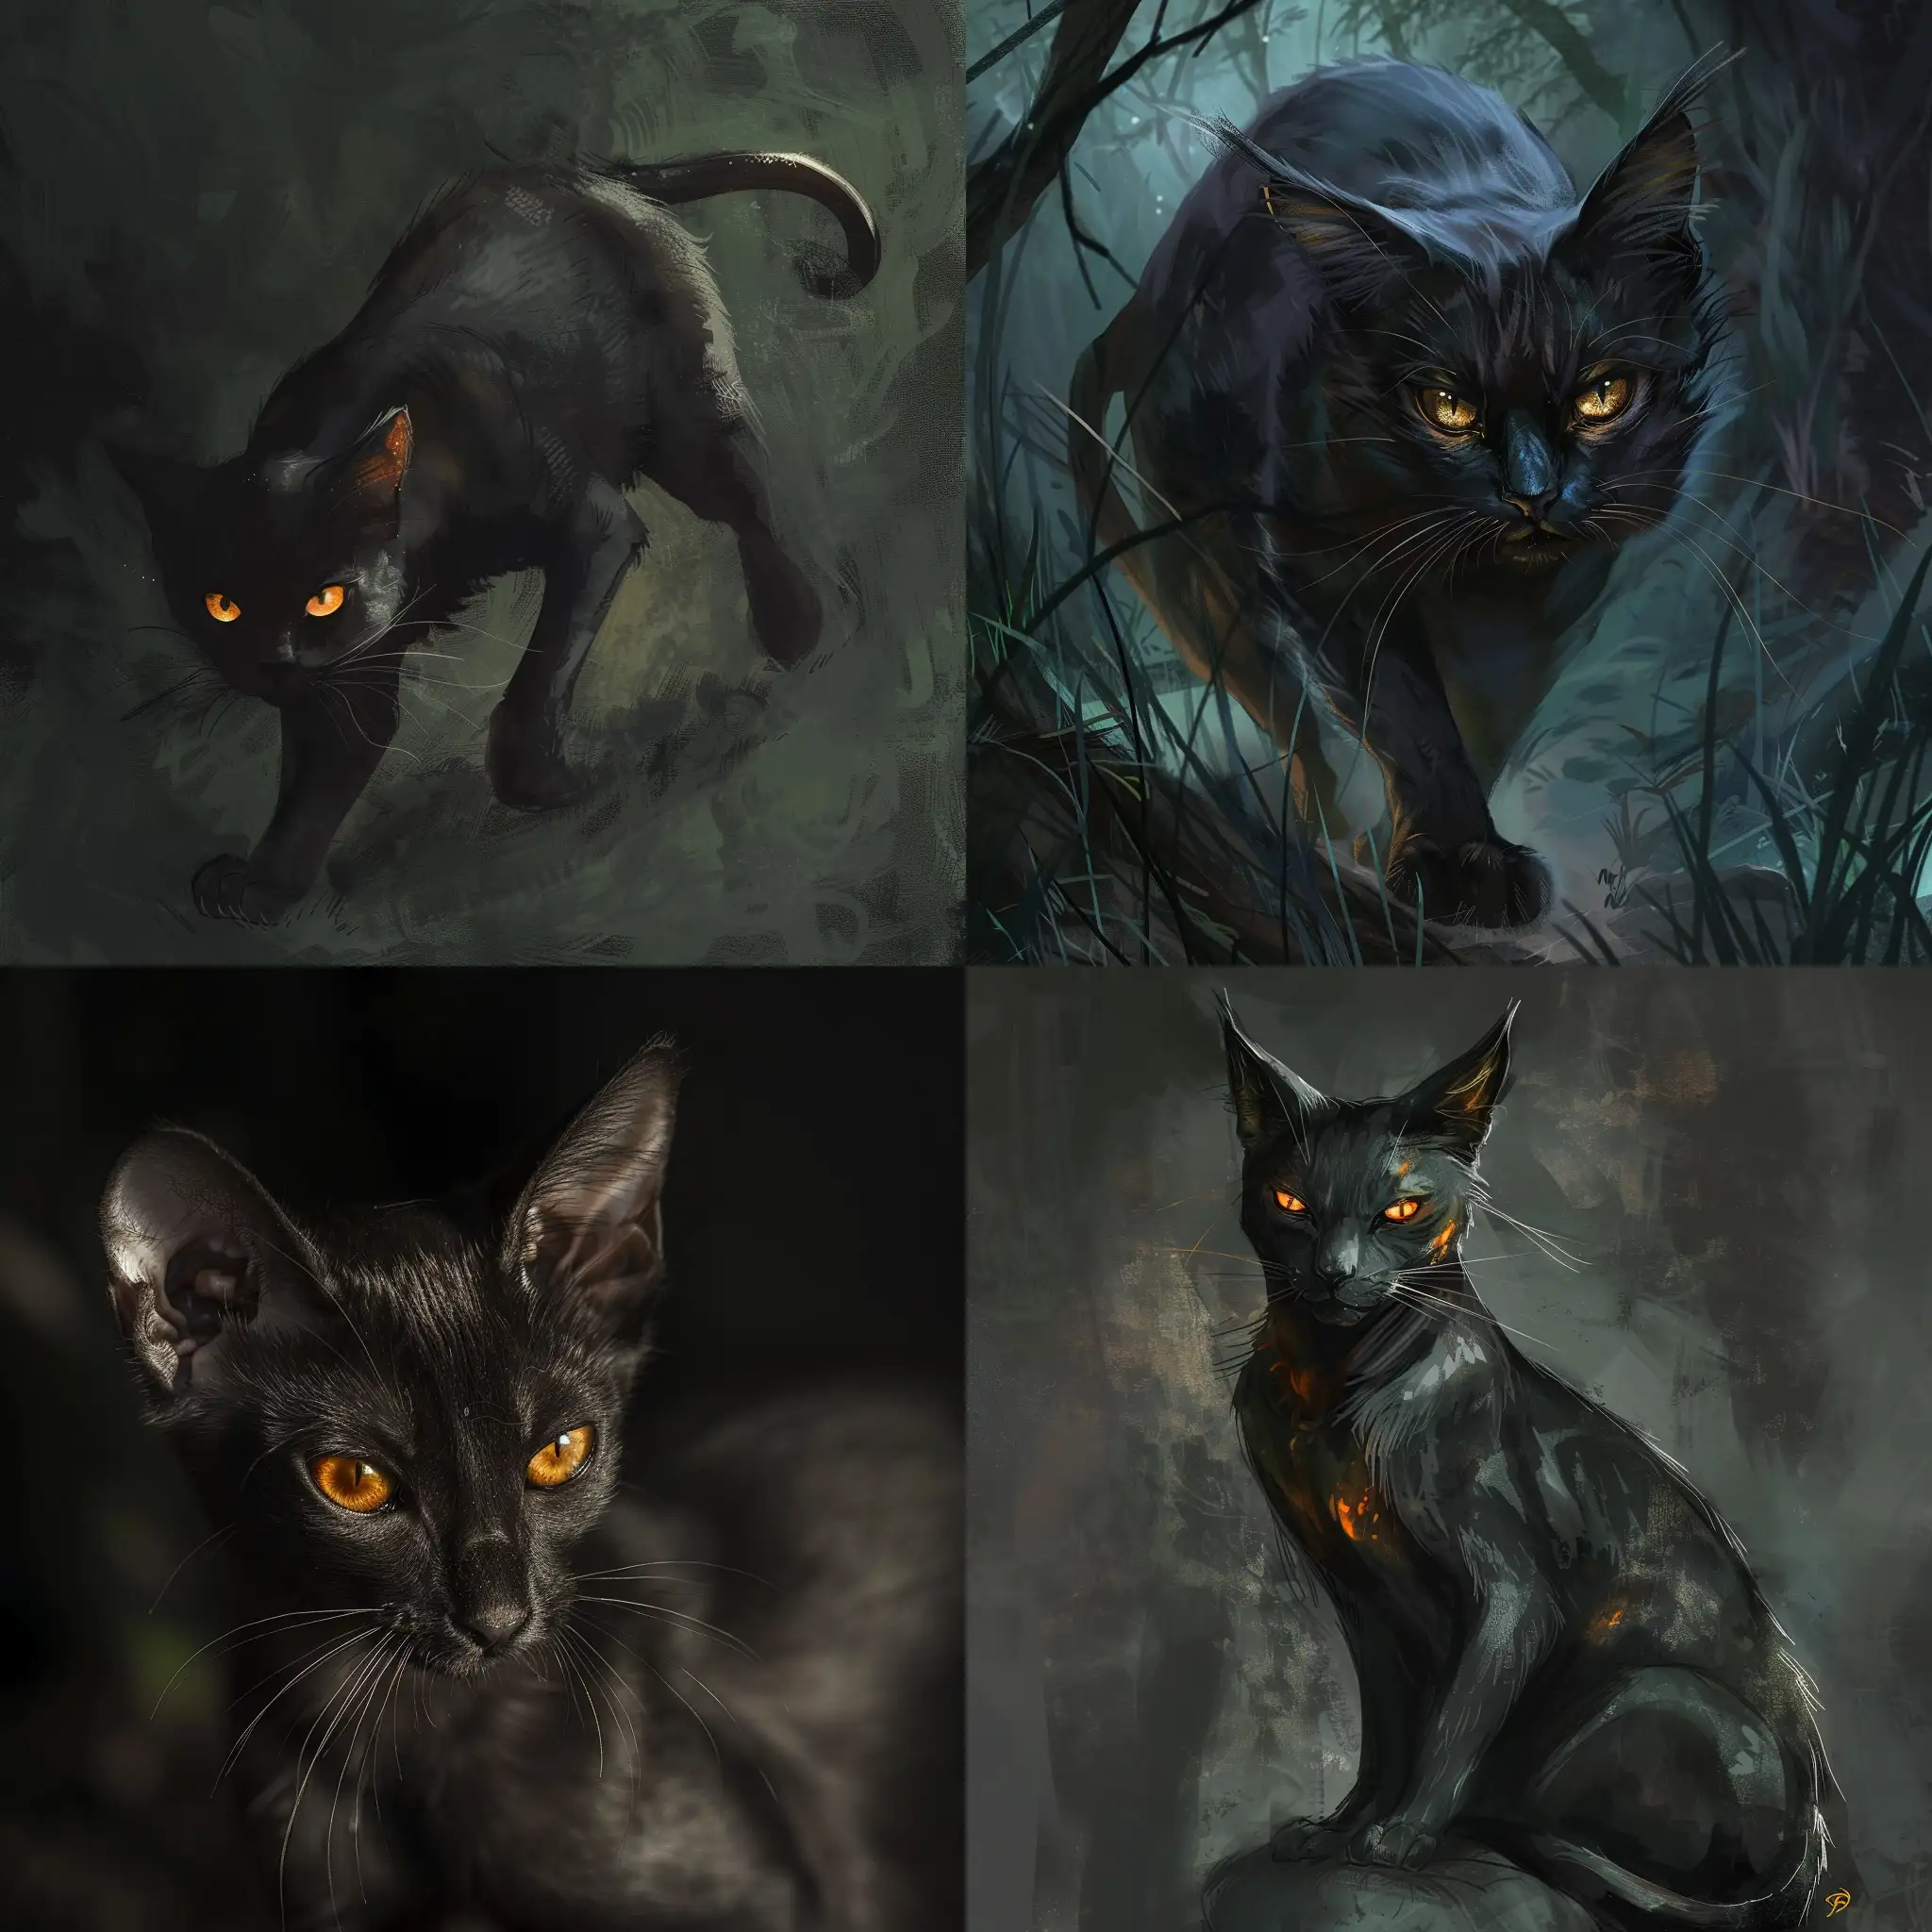 Sleek and stealthy, the Púca as a cat moves with silent grace. Its golden eyes watch every move with keen interest, and its dark fur allows it to blend into the night.
o	Cat: Sleek and stealthy, the Púca as a cat moves with silent grace, its golden eyes watching every move with keen interest.
